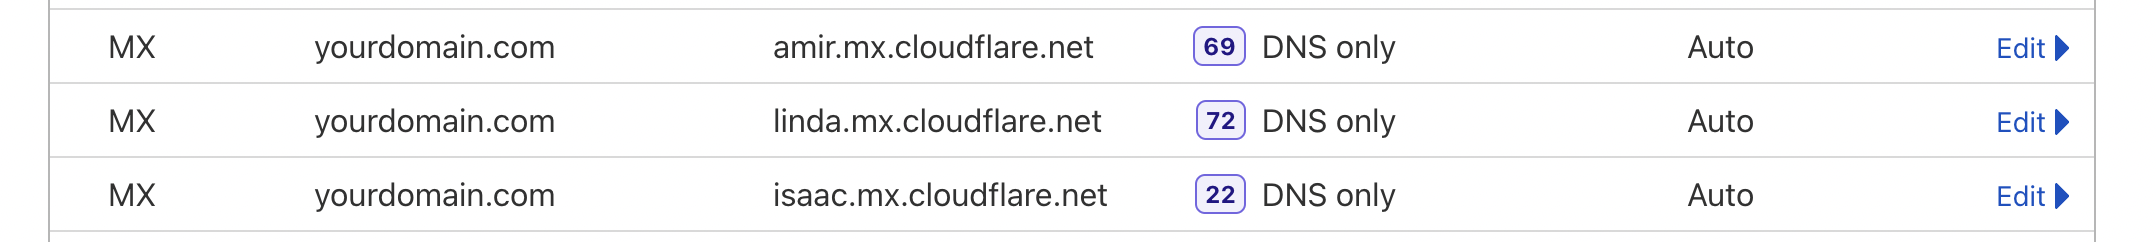 Cloudflare DNS MX Records.png